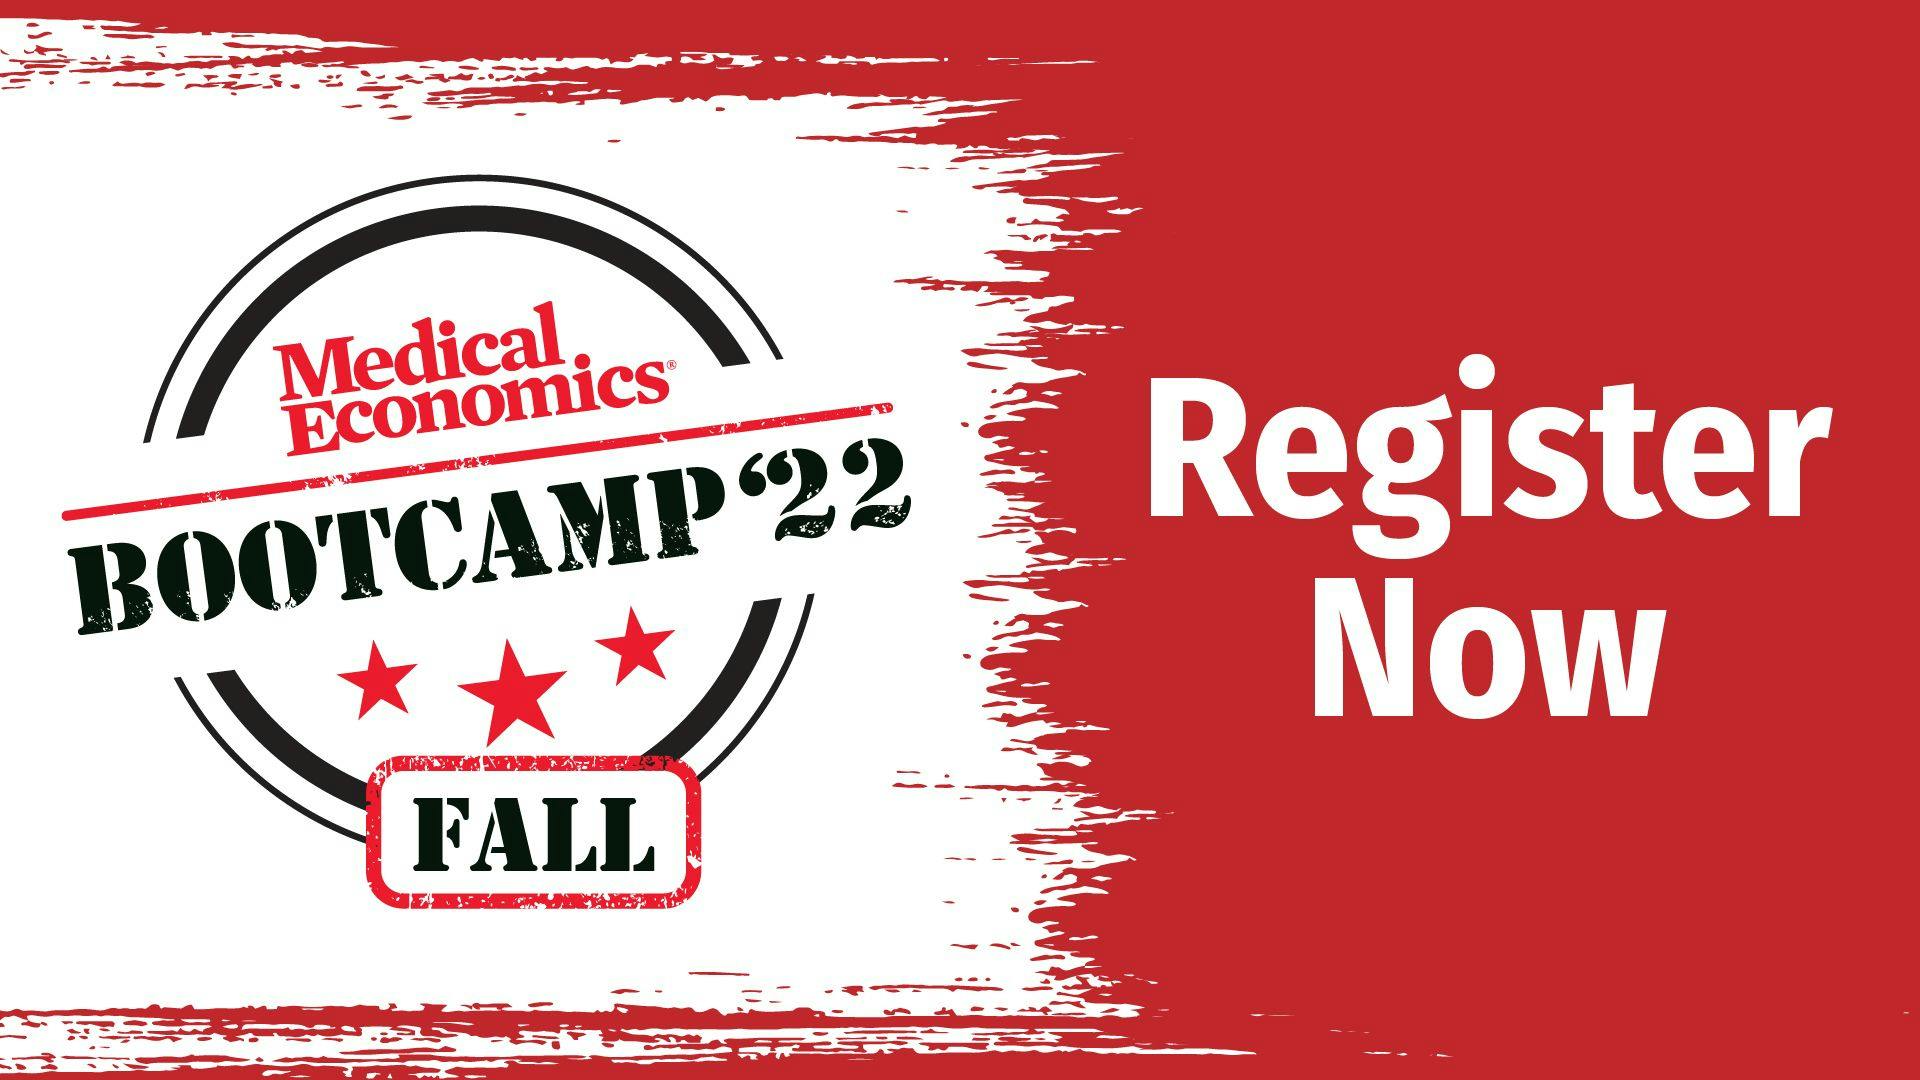 It's not too late to sign up for today's Fall Physician Bootcamp